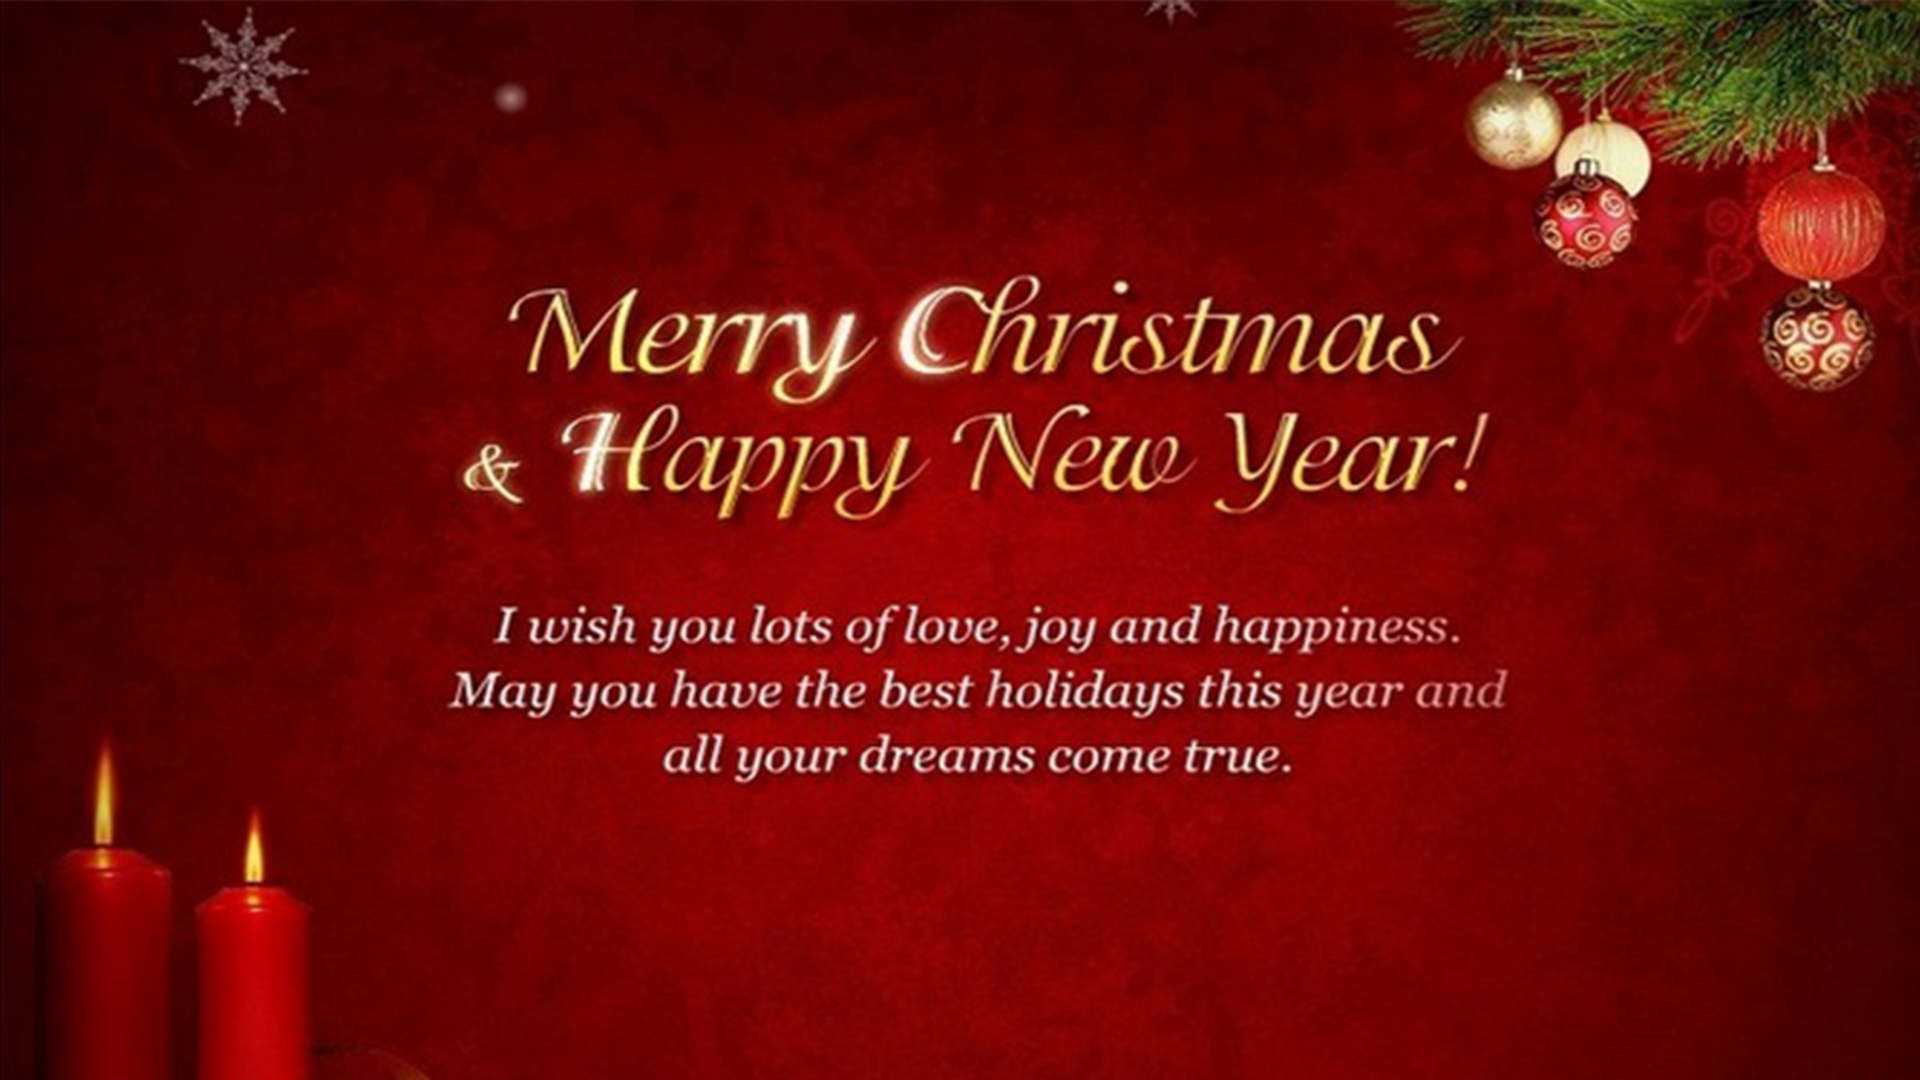 Merry Christmas & Happy New Year hd image